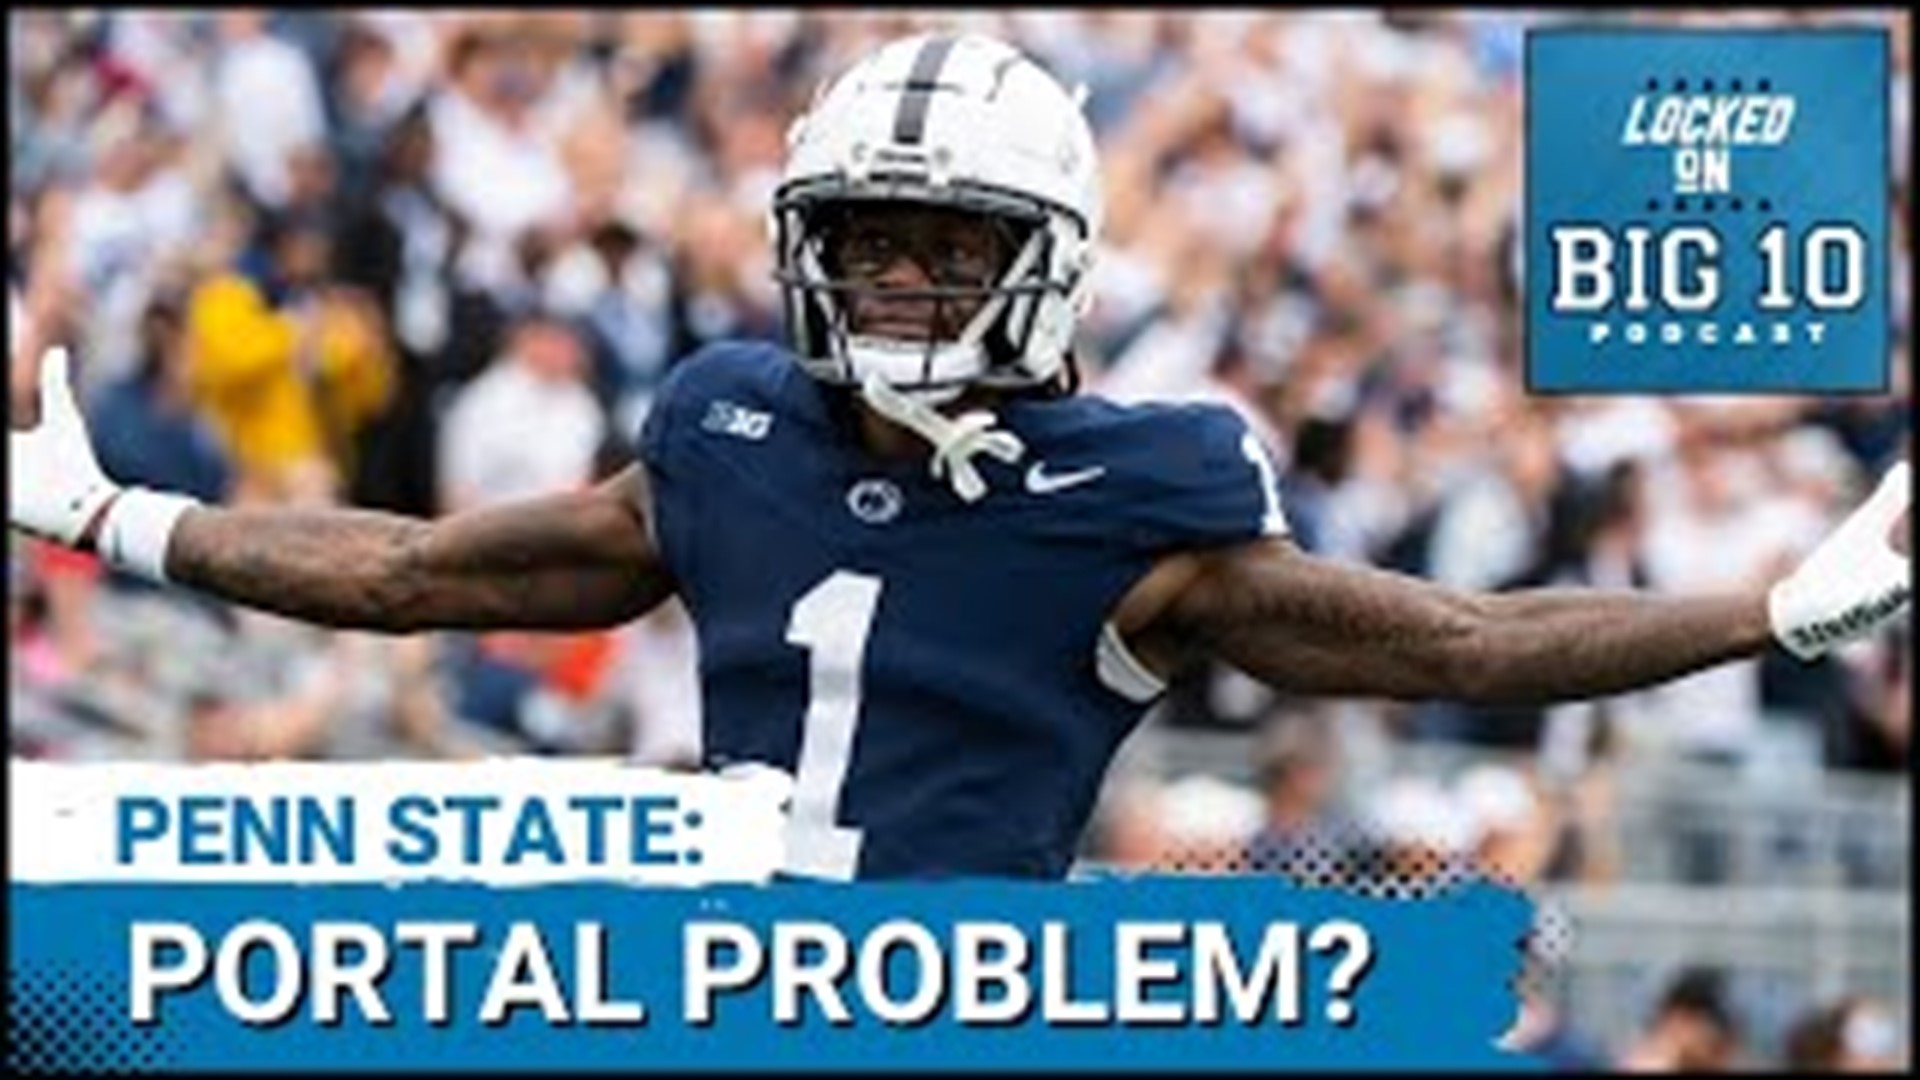 Penn State football still has a wide receiver problem.  A lack of receivers who could stretch the field and hurt defenses was the difference.